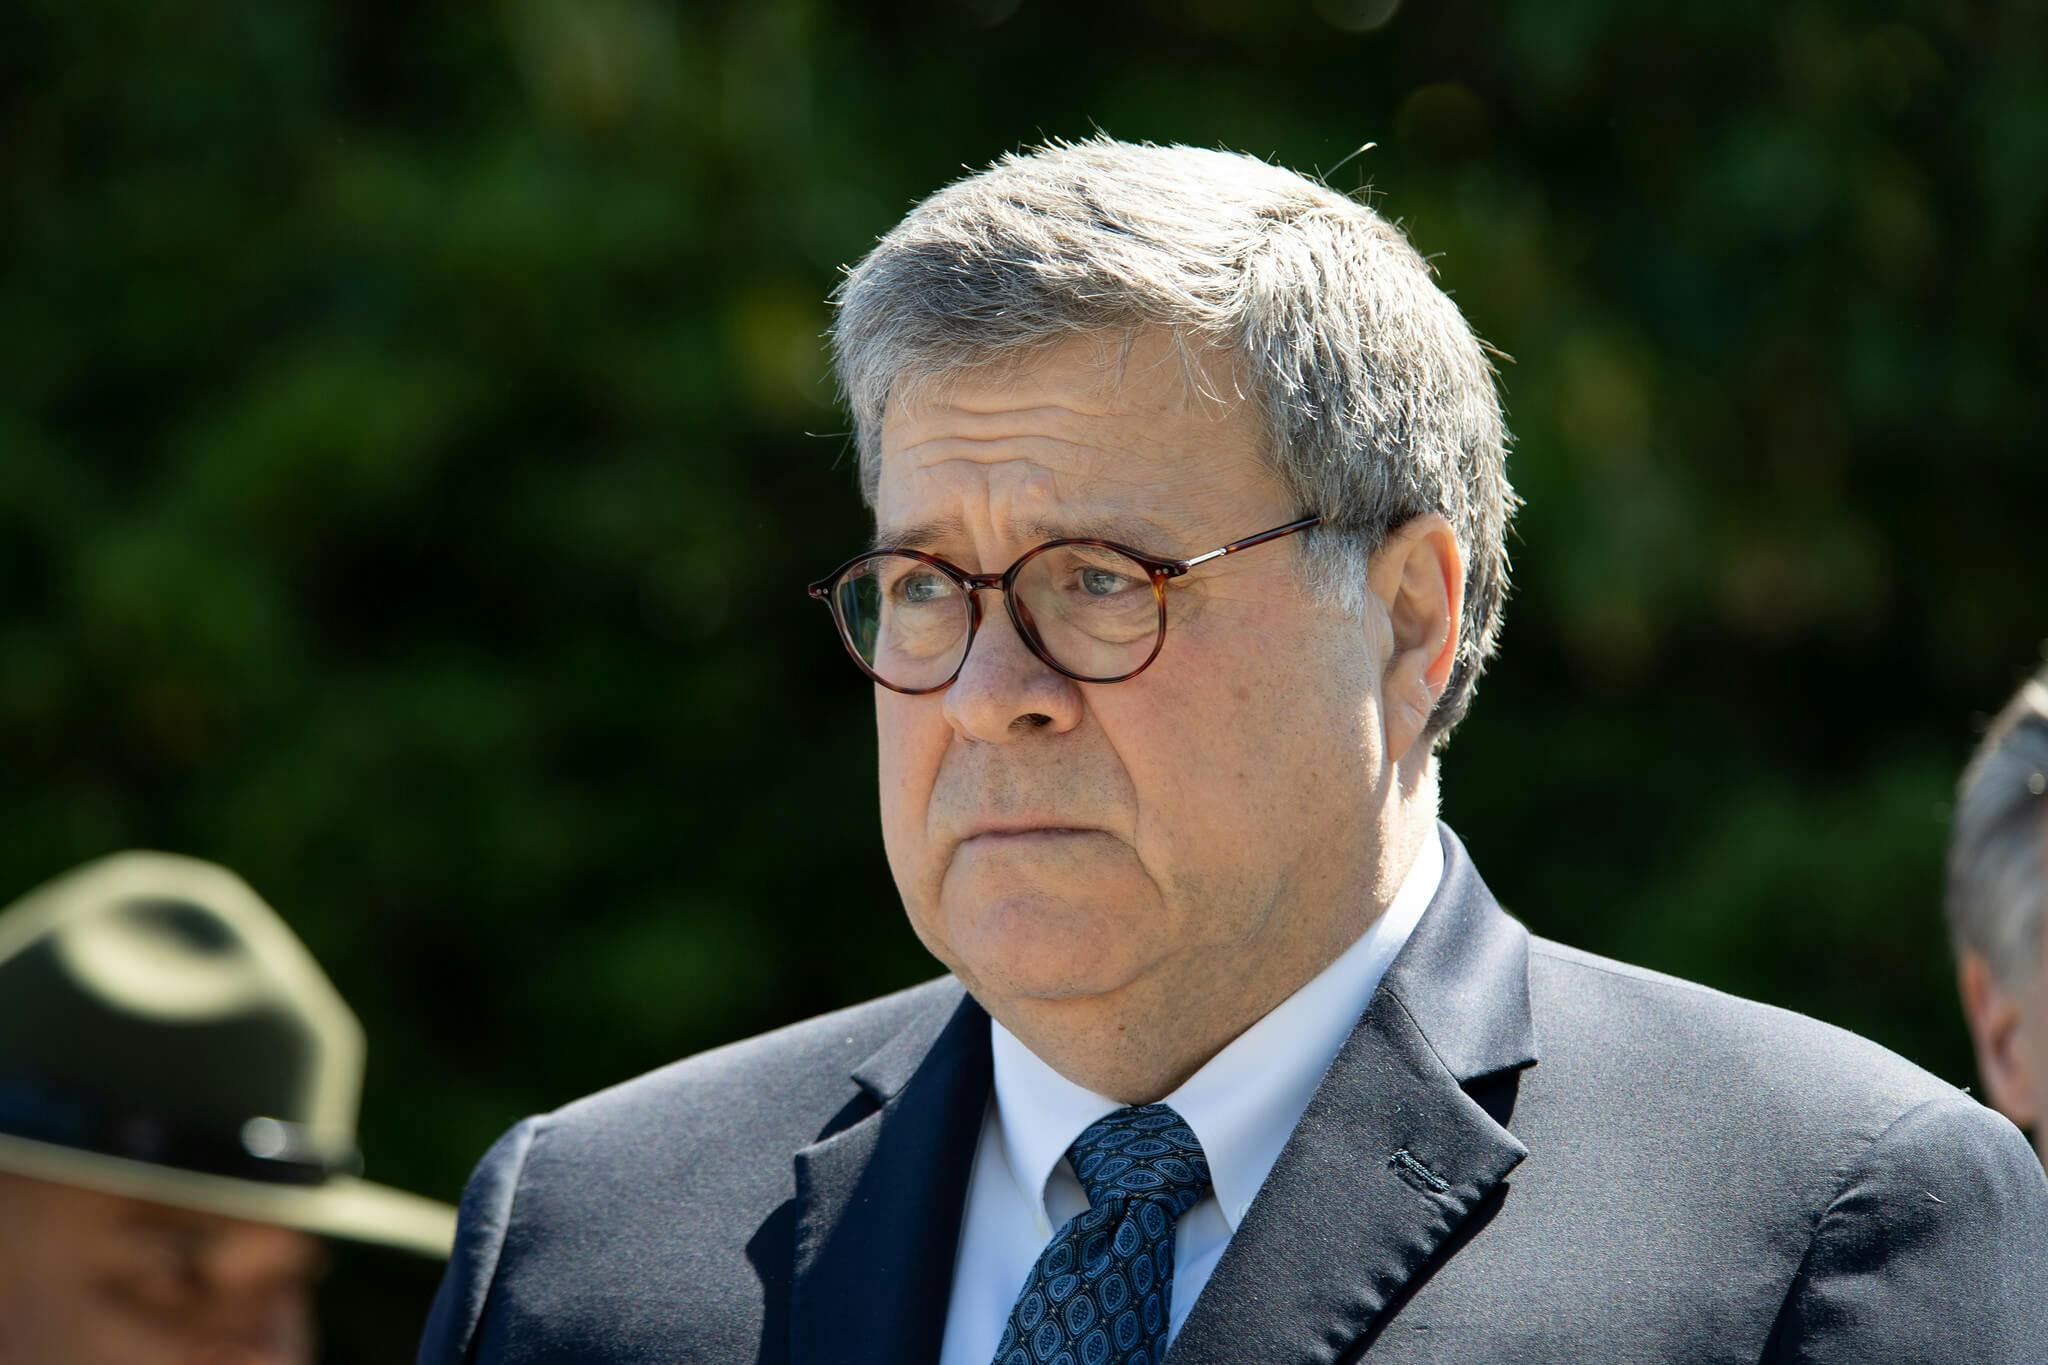 The EARN IT Act Attorney General Bill Barr